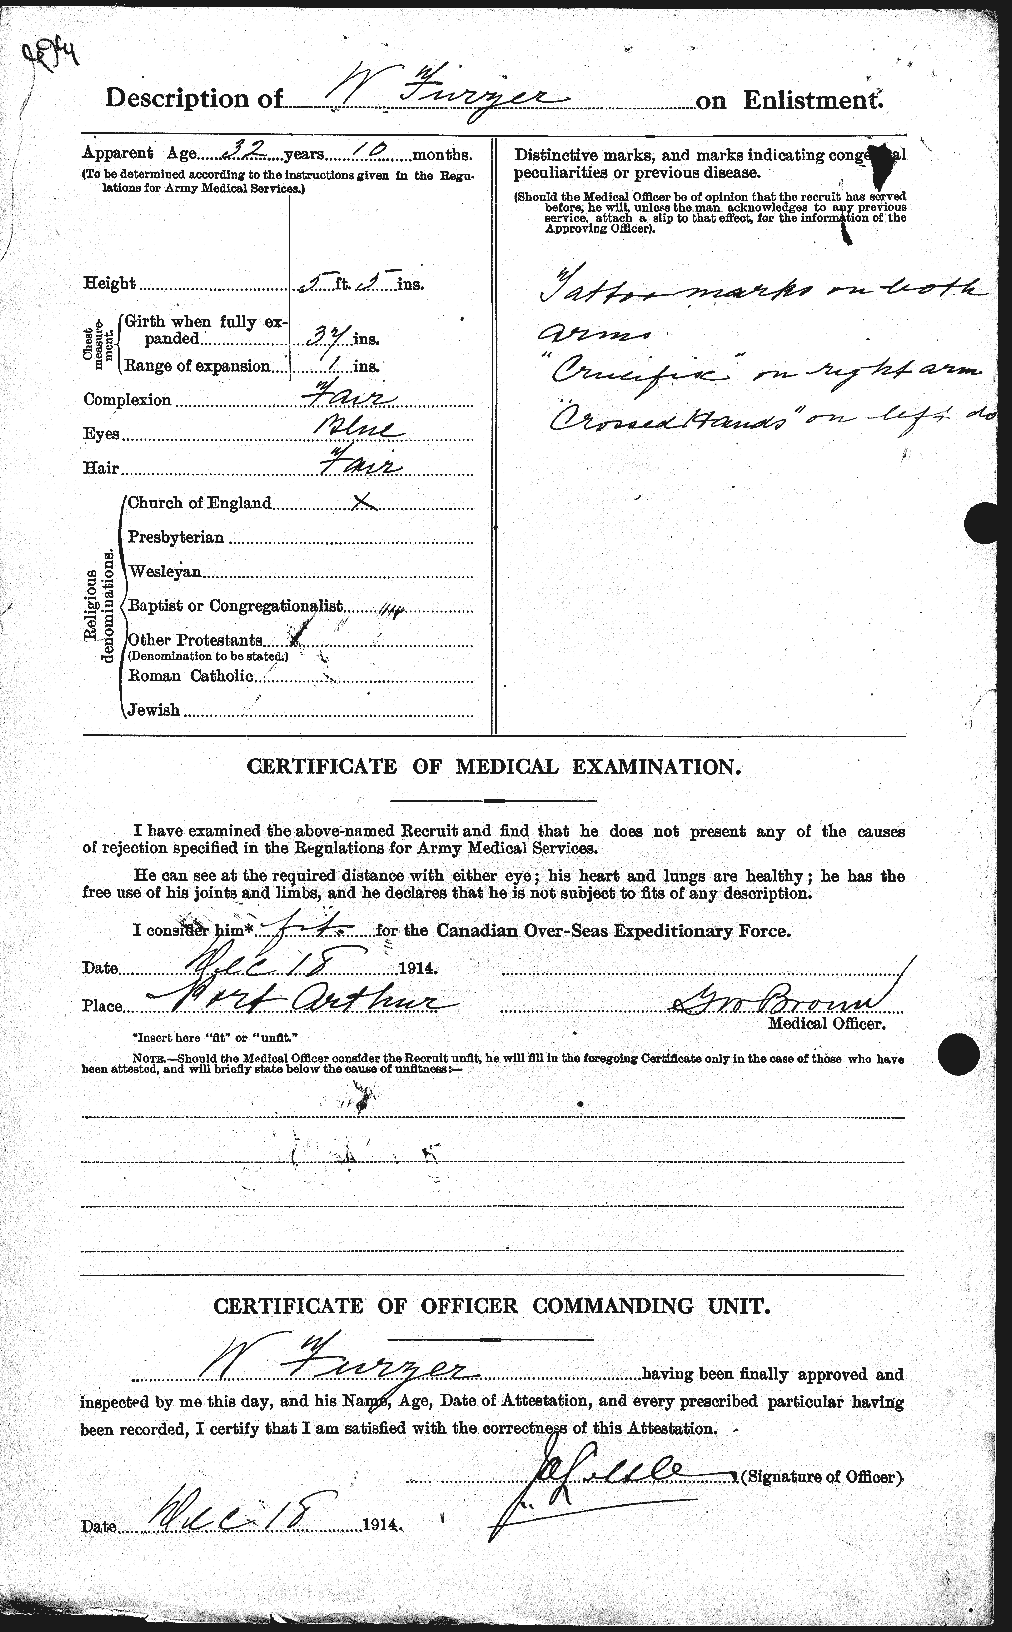 Personnel Records of the First World War - CEF 337736b